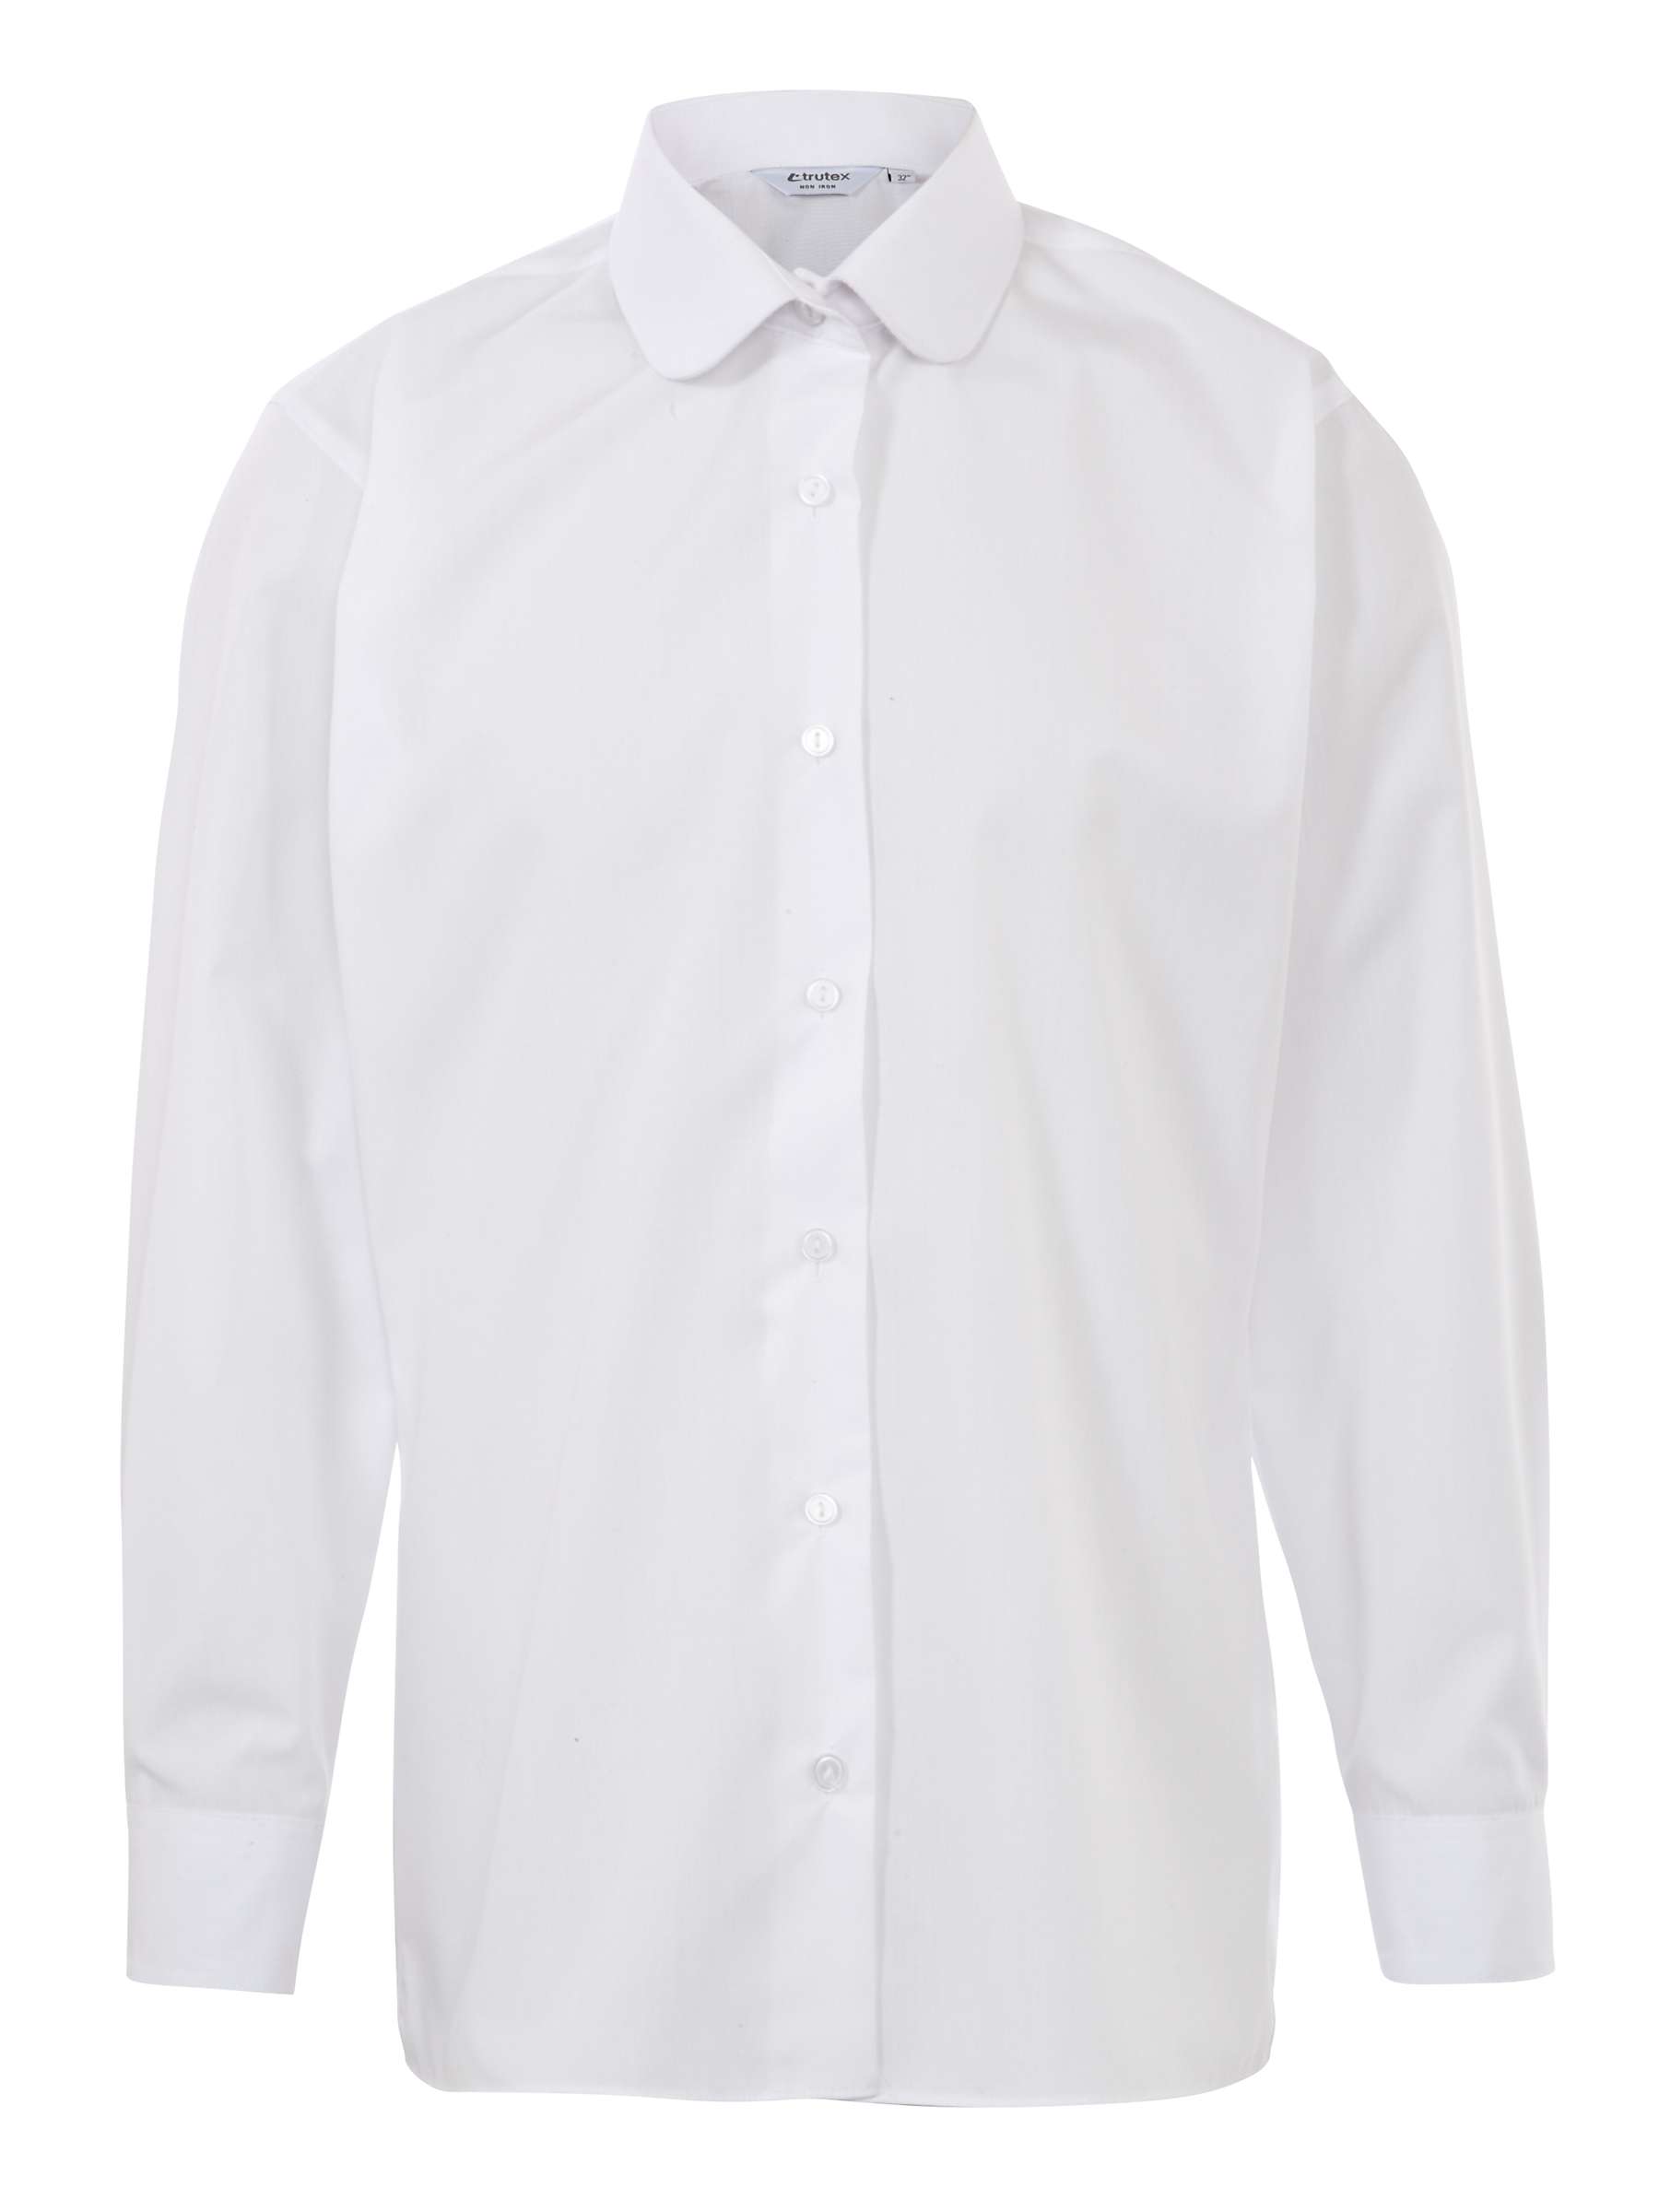 Buy Girls' School Round Collar Blouse, Pack of 2, White Online at johnlewis.com